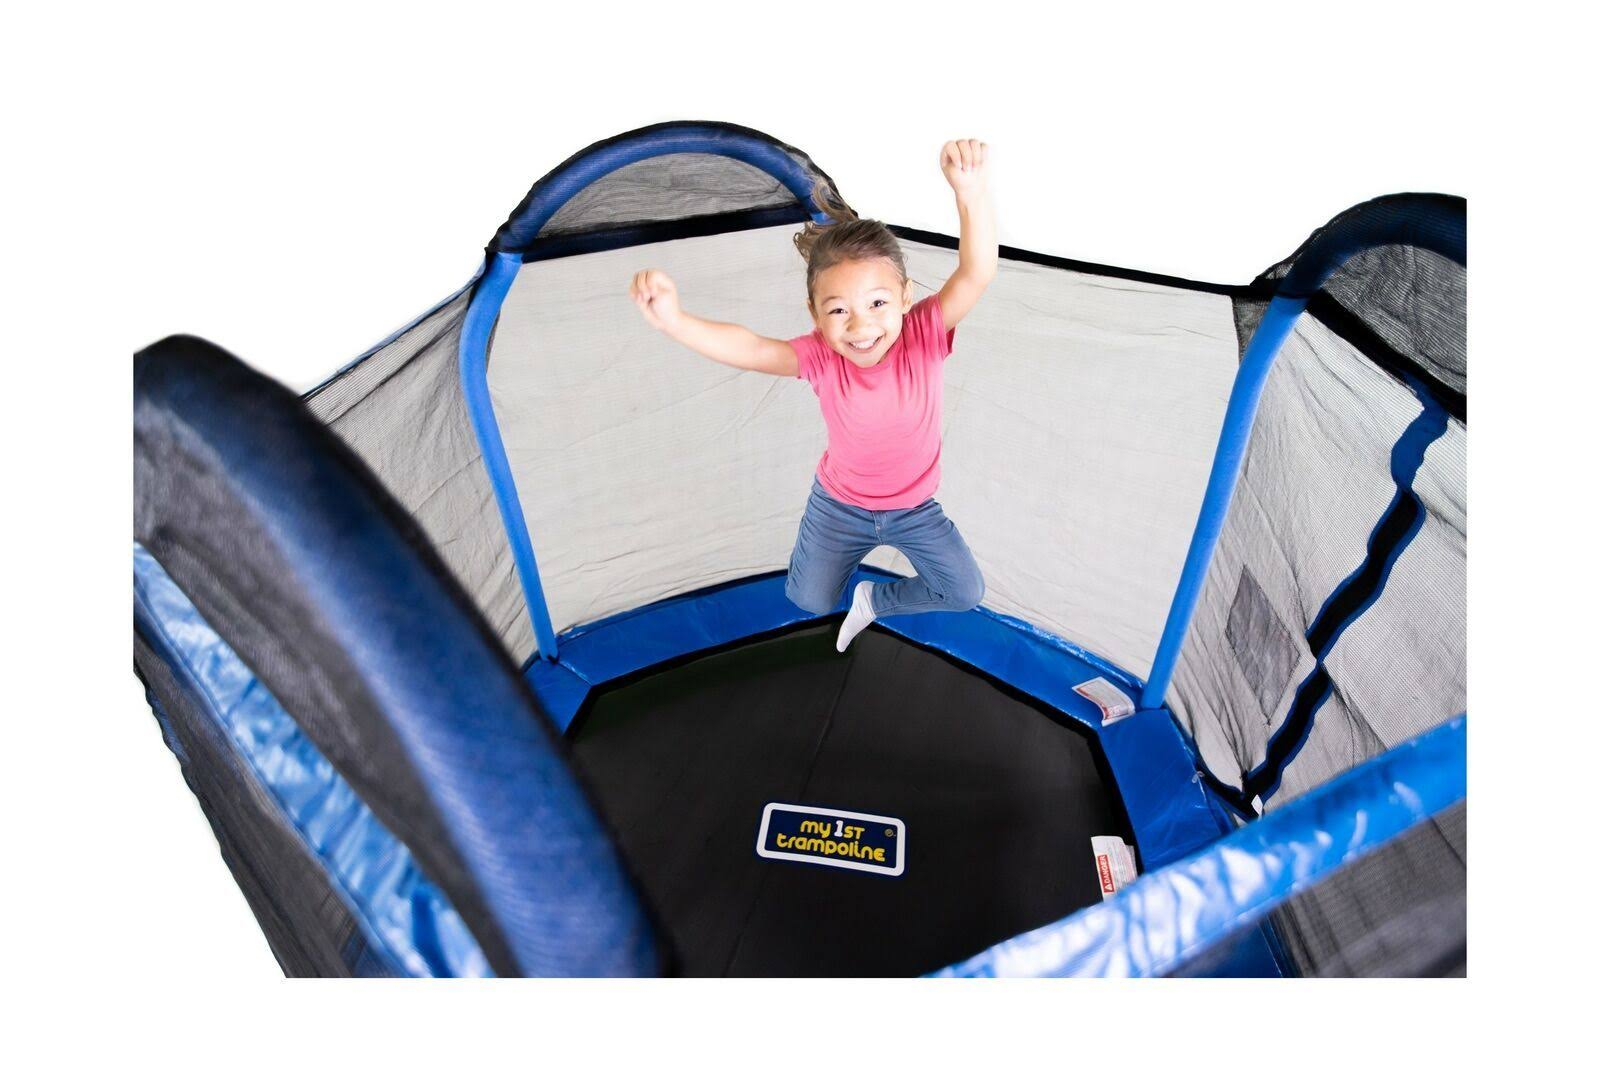 Bounce Pro 7′ My First Trampoline Hexagon (Ages 3-10) for Kids